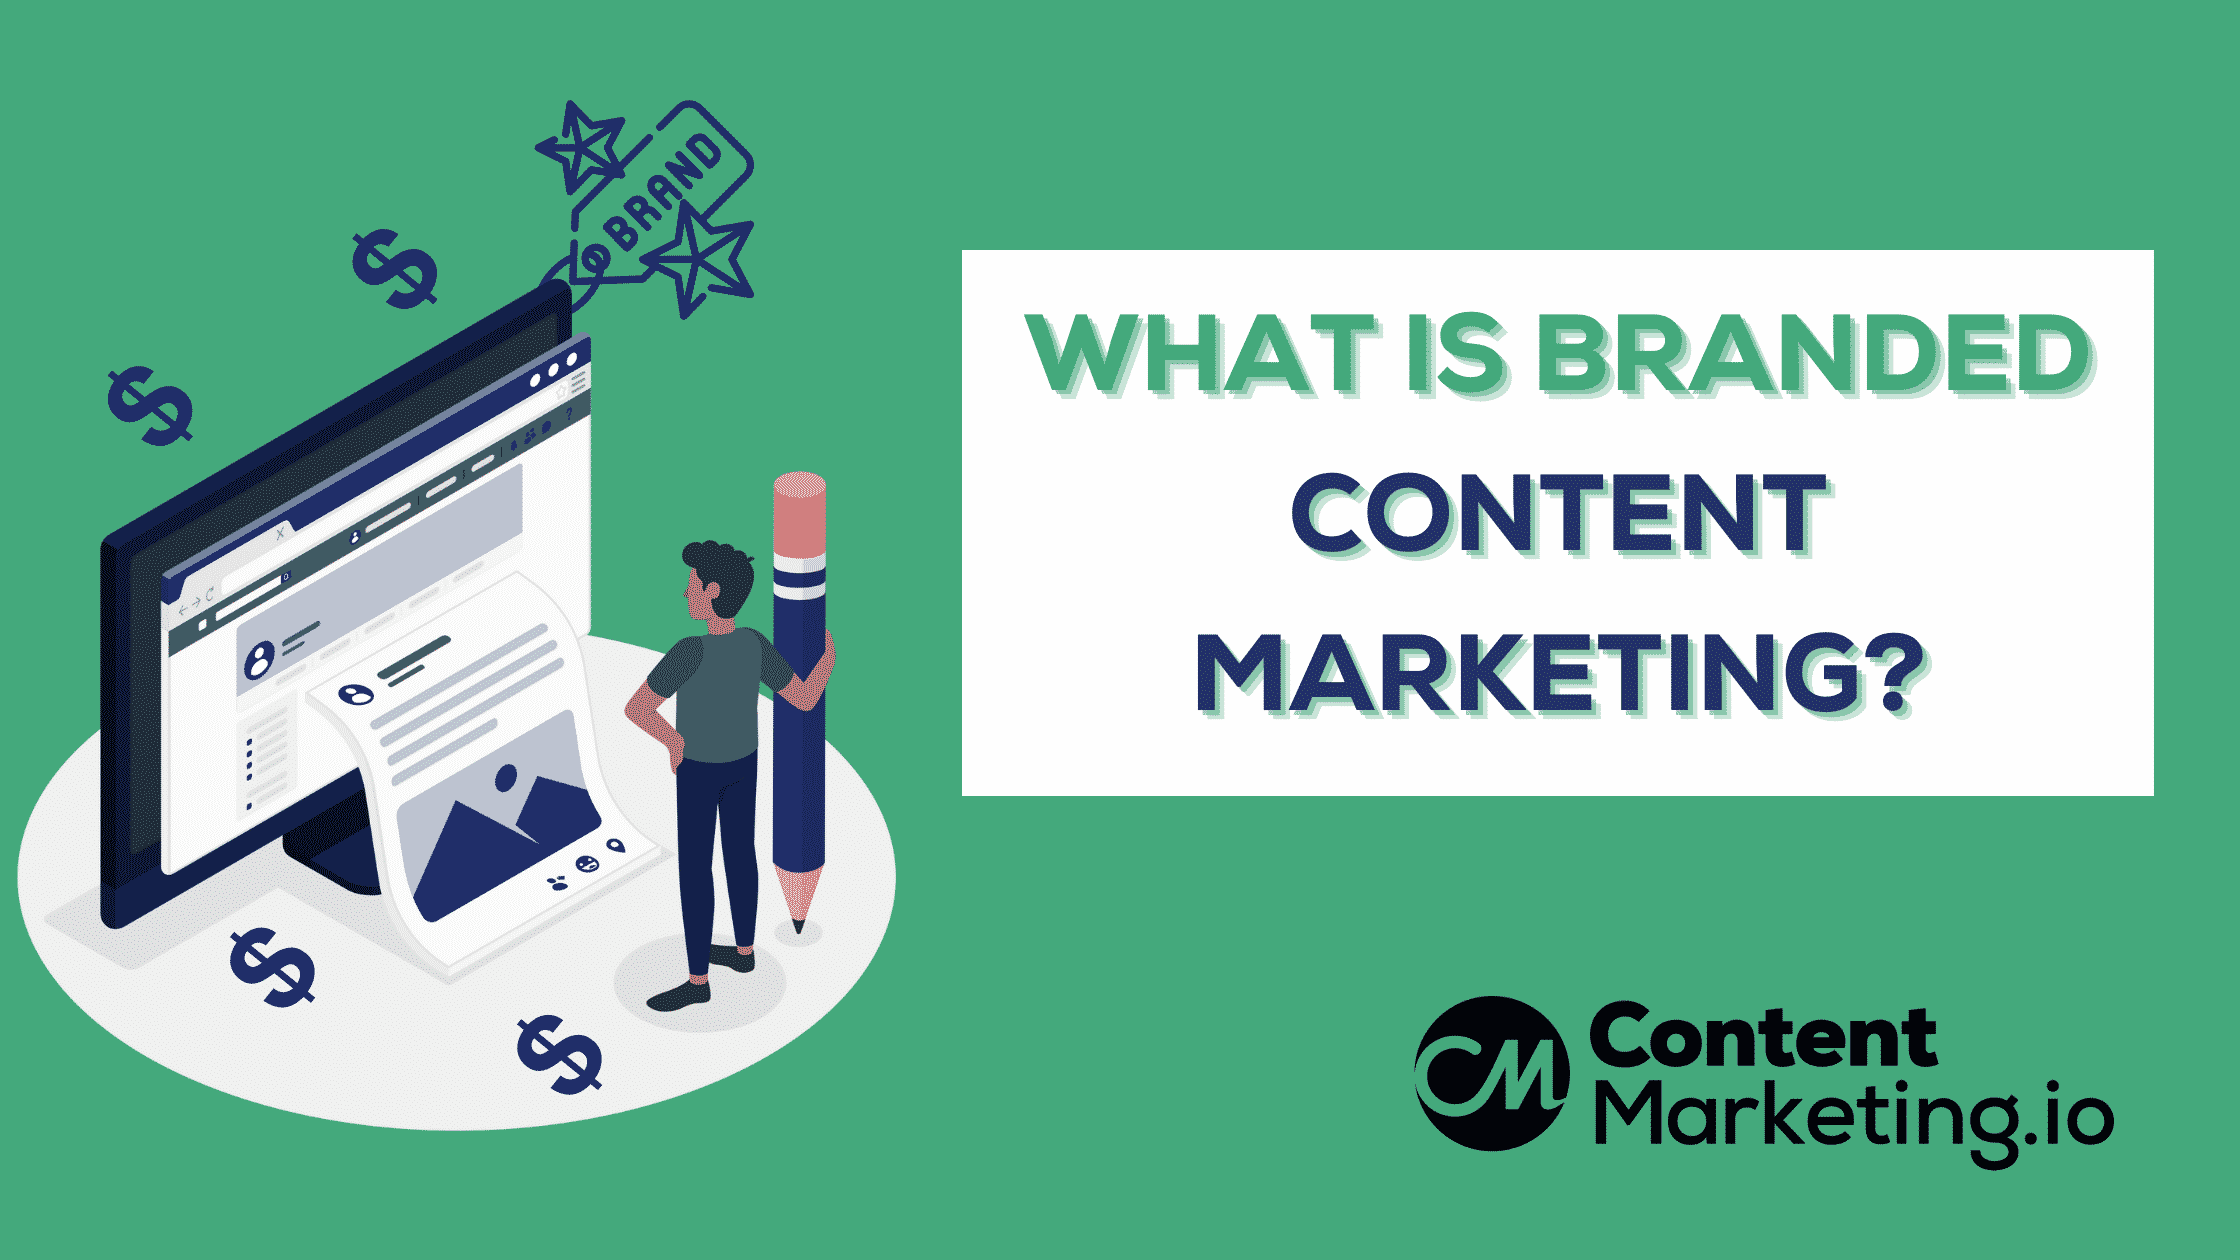 What is branded content marketing